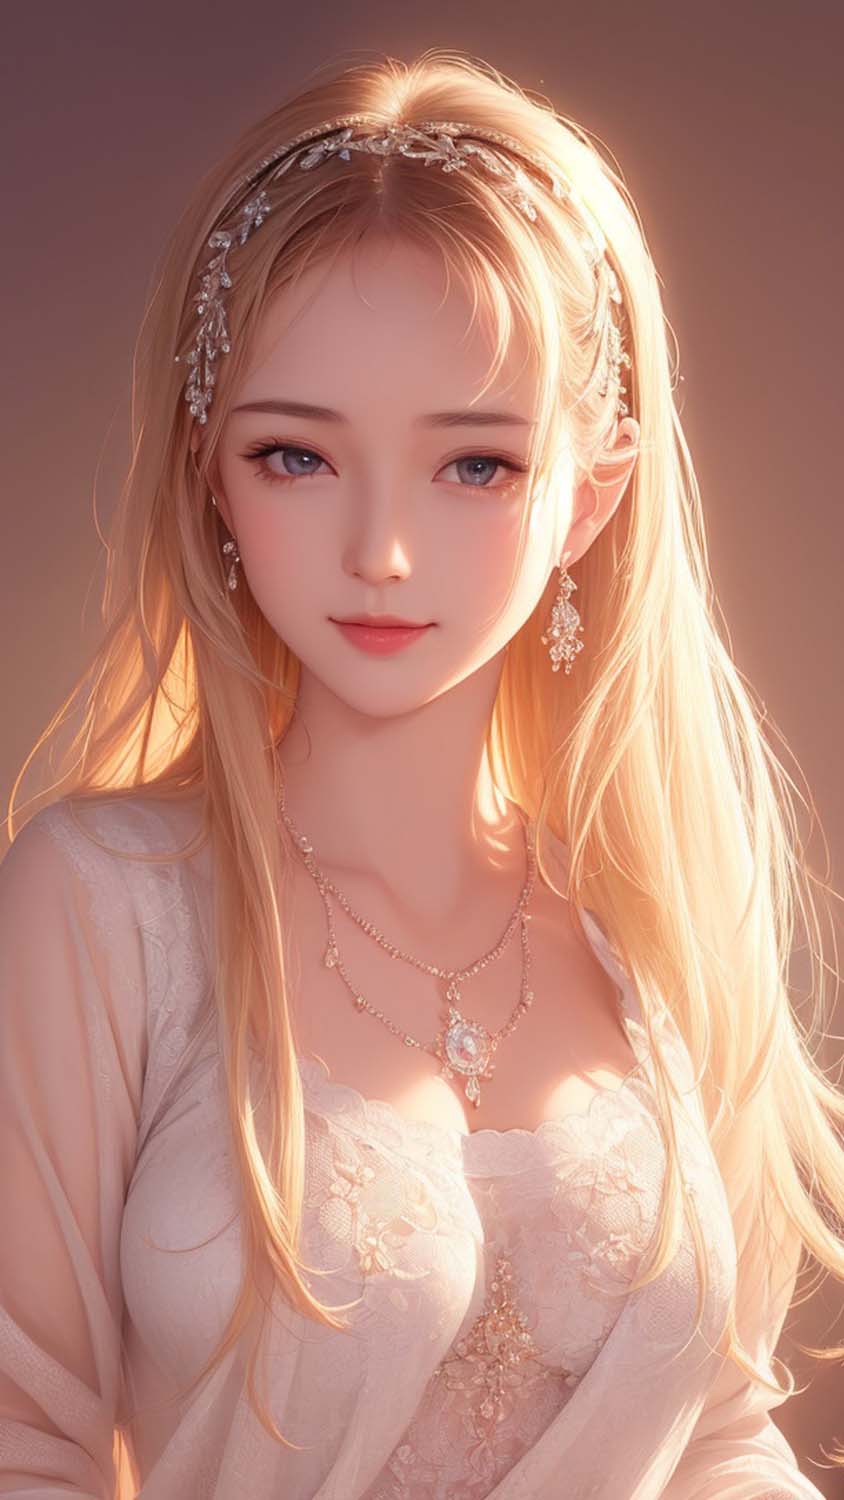 Beautiful Doll Images : Cute - Apps on Google Play